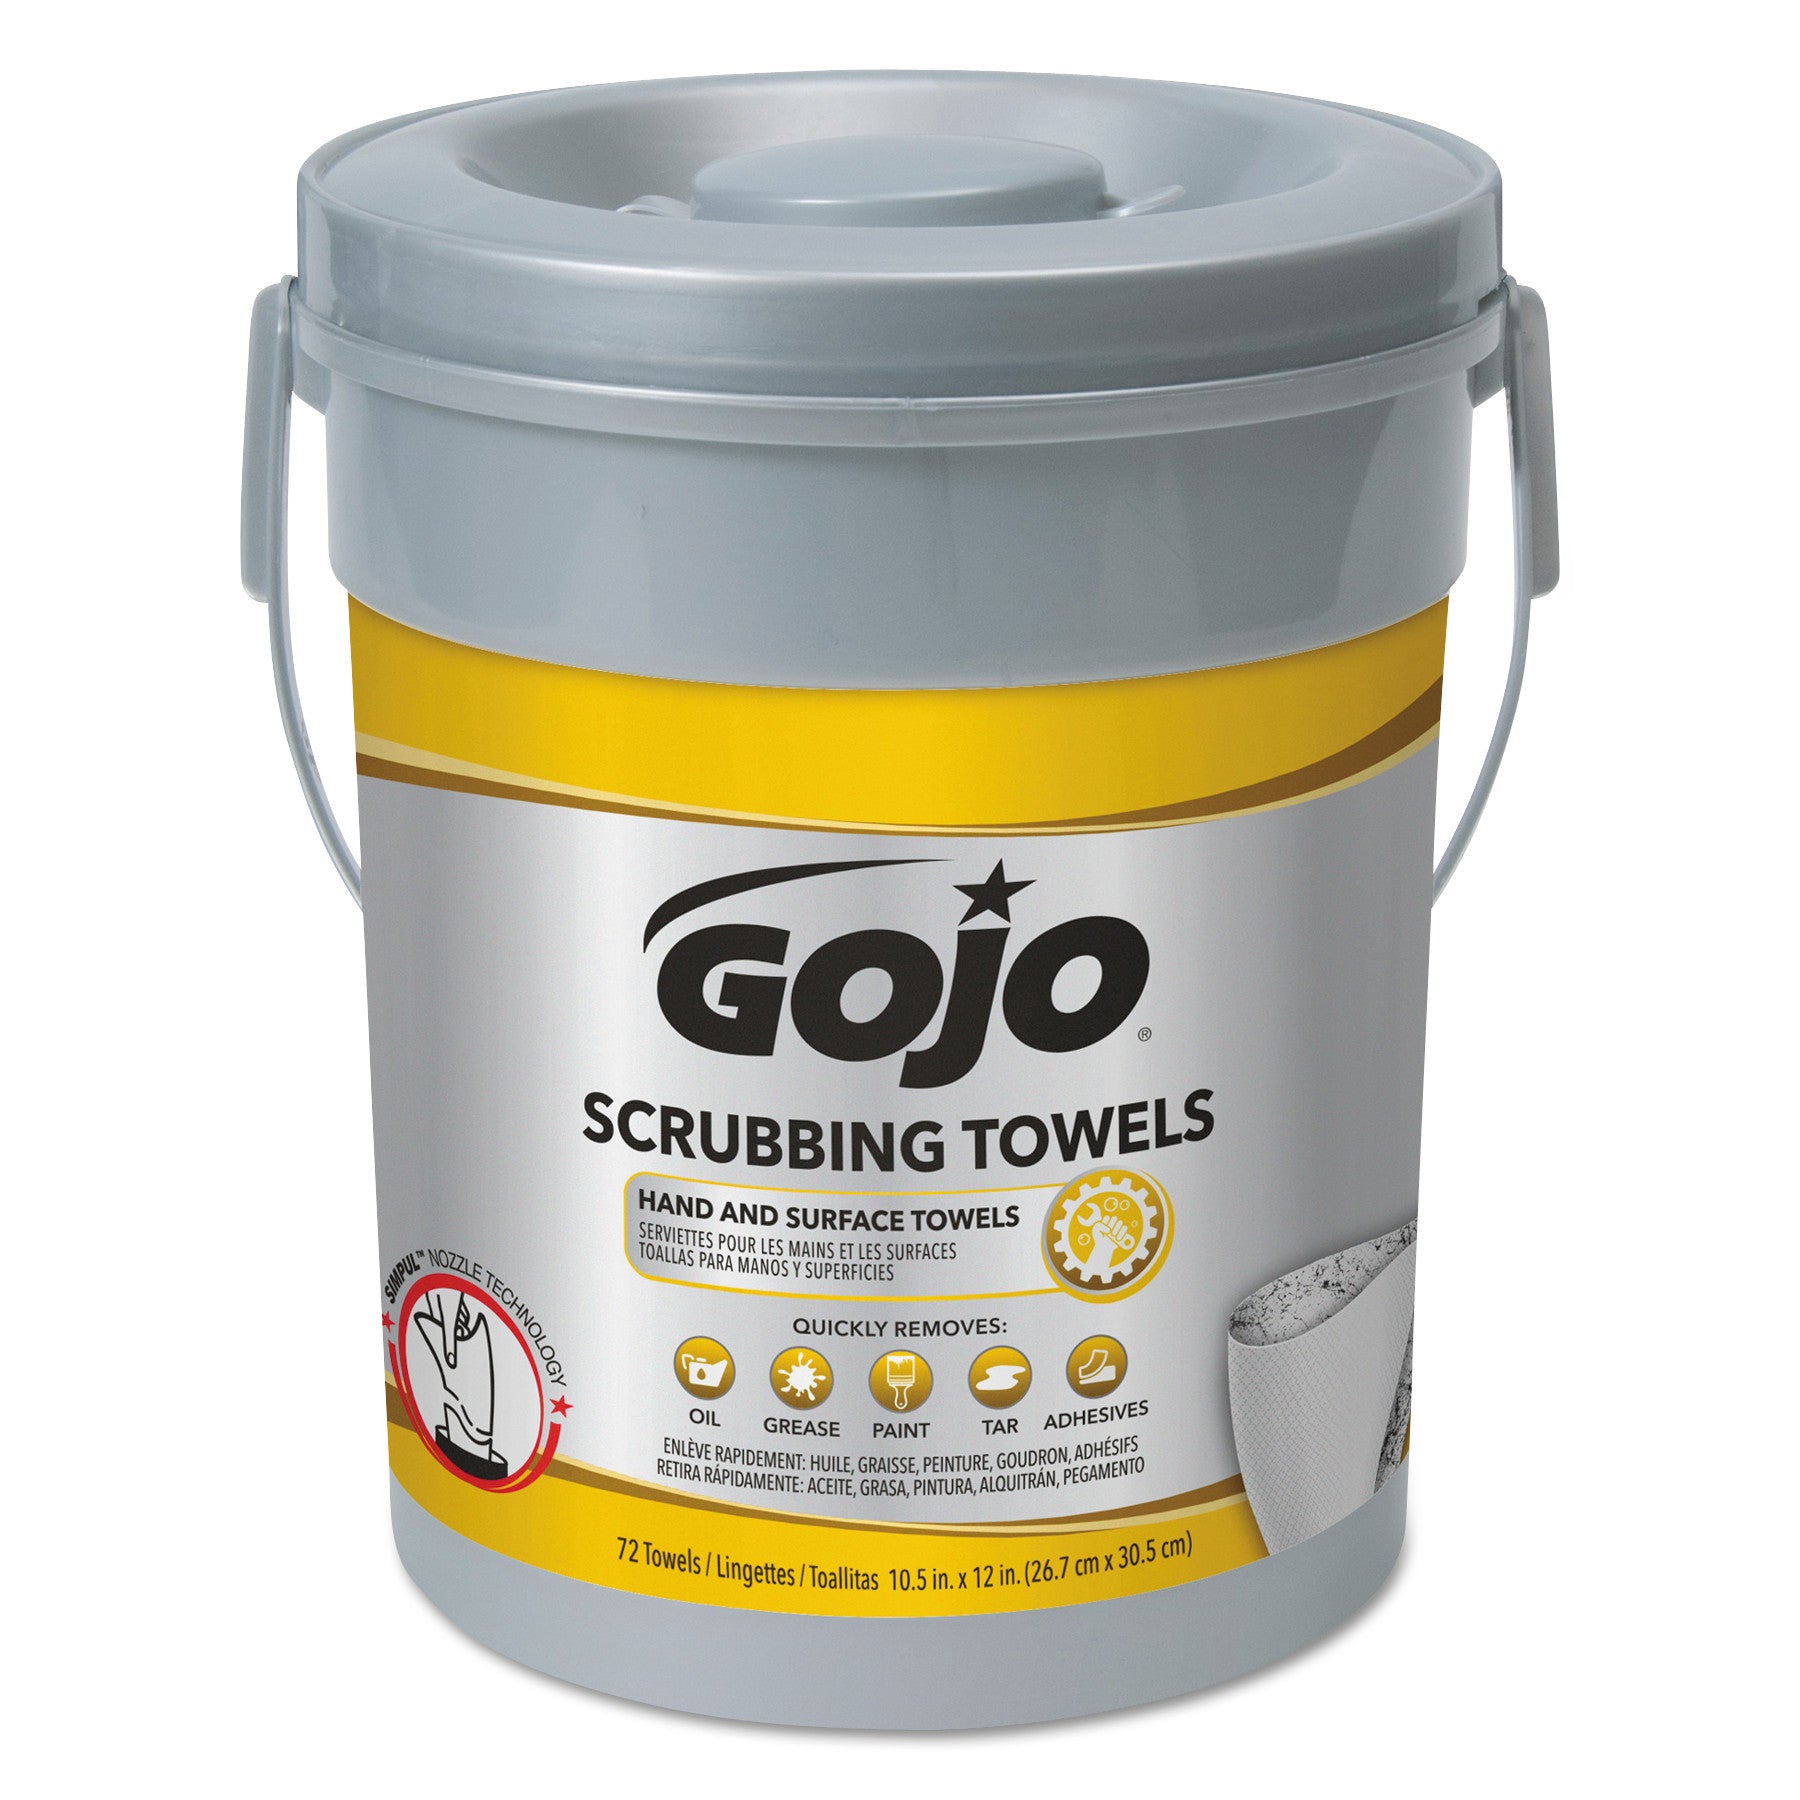 Scrubbing Towels, Hand Cleaning, 2-Ply, 10.5 x 12, Fresh Citrus, Silver/Yellow, 72/Bucket - 